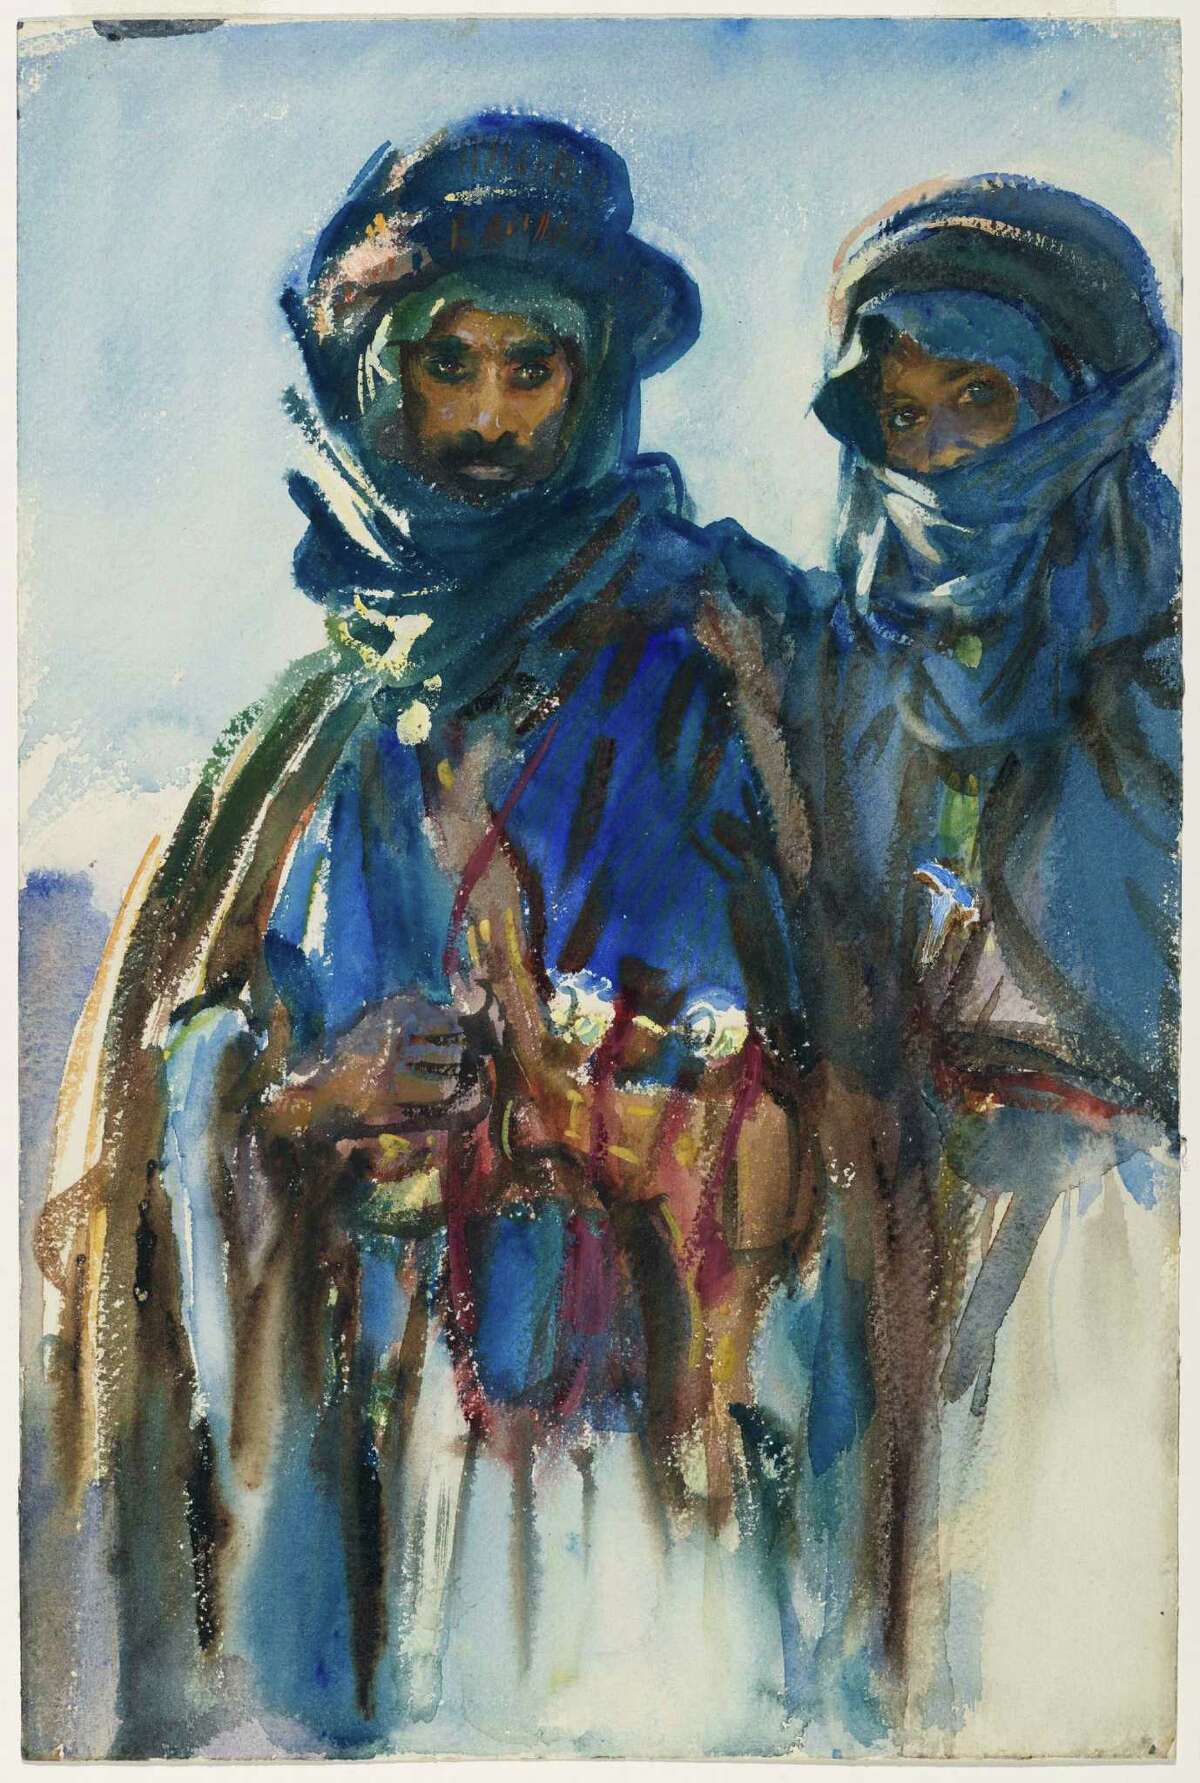 John Singer Sargent painted "Bedouins" when he visited Cairo to research themes for his Boston Public Library mural.